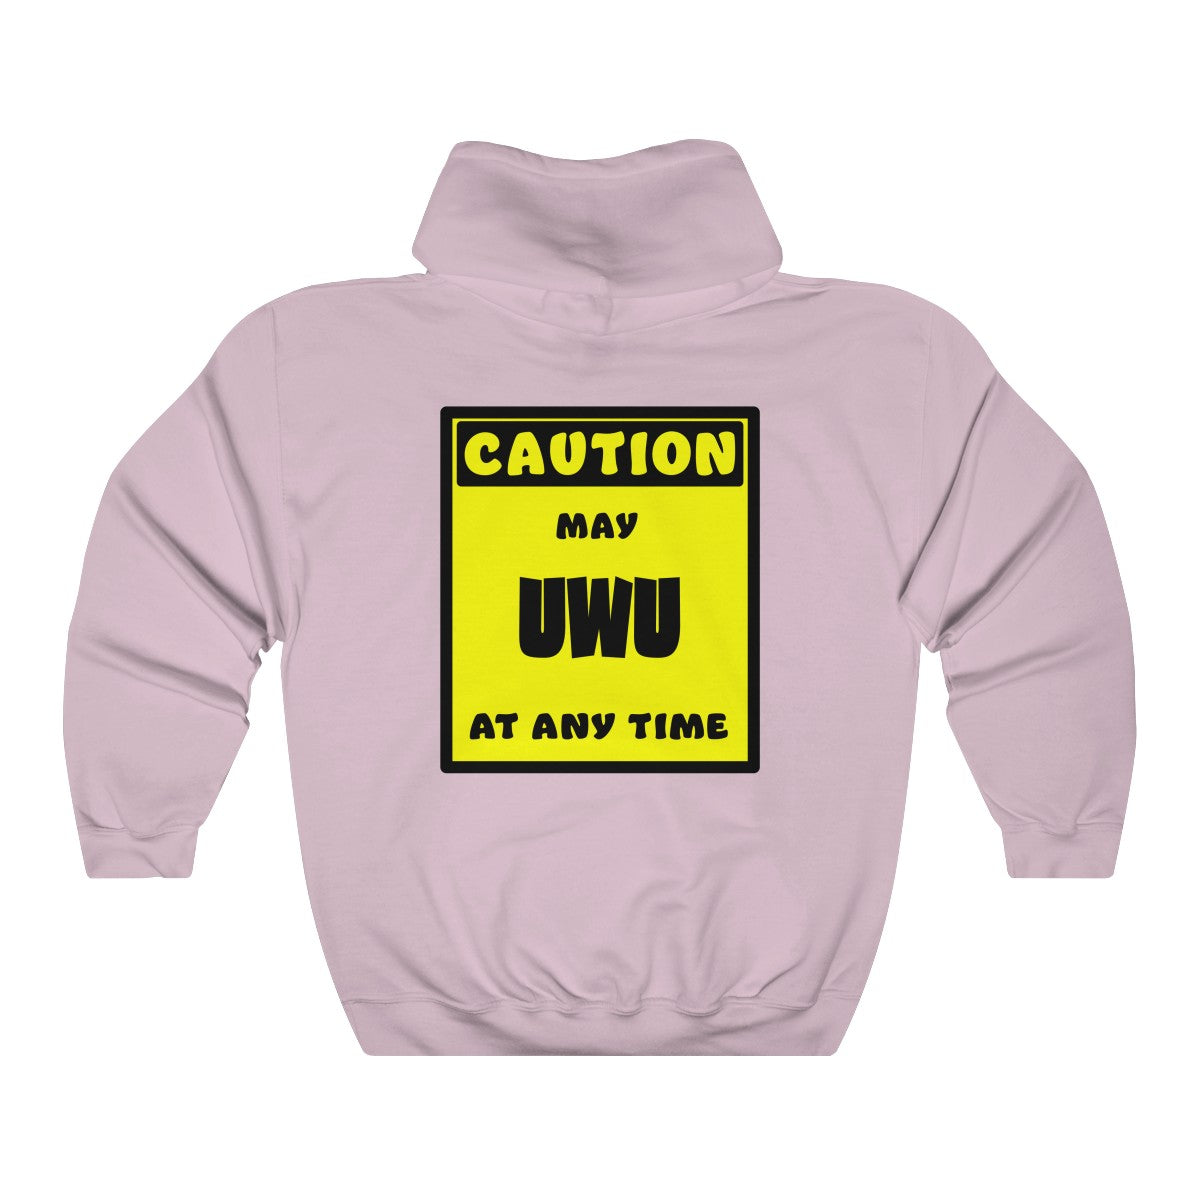 CAUTION! May UWU at any time! - Hoodie Hoodie AFLT-Whootorca Light Pink S 